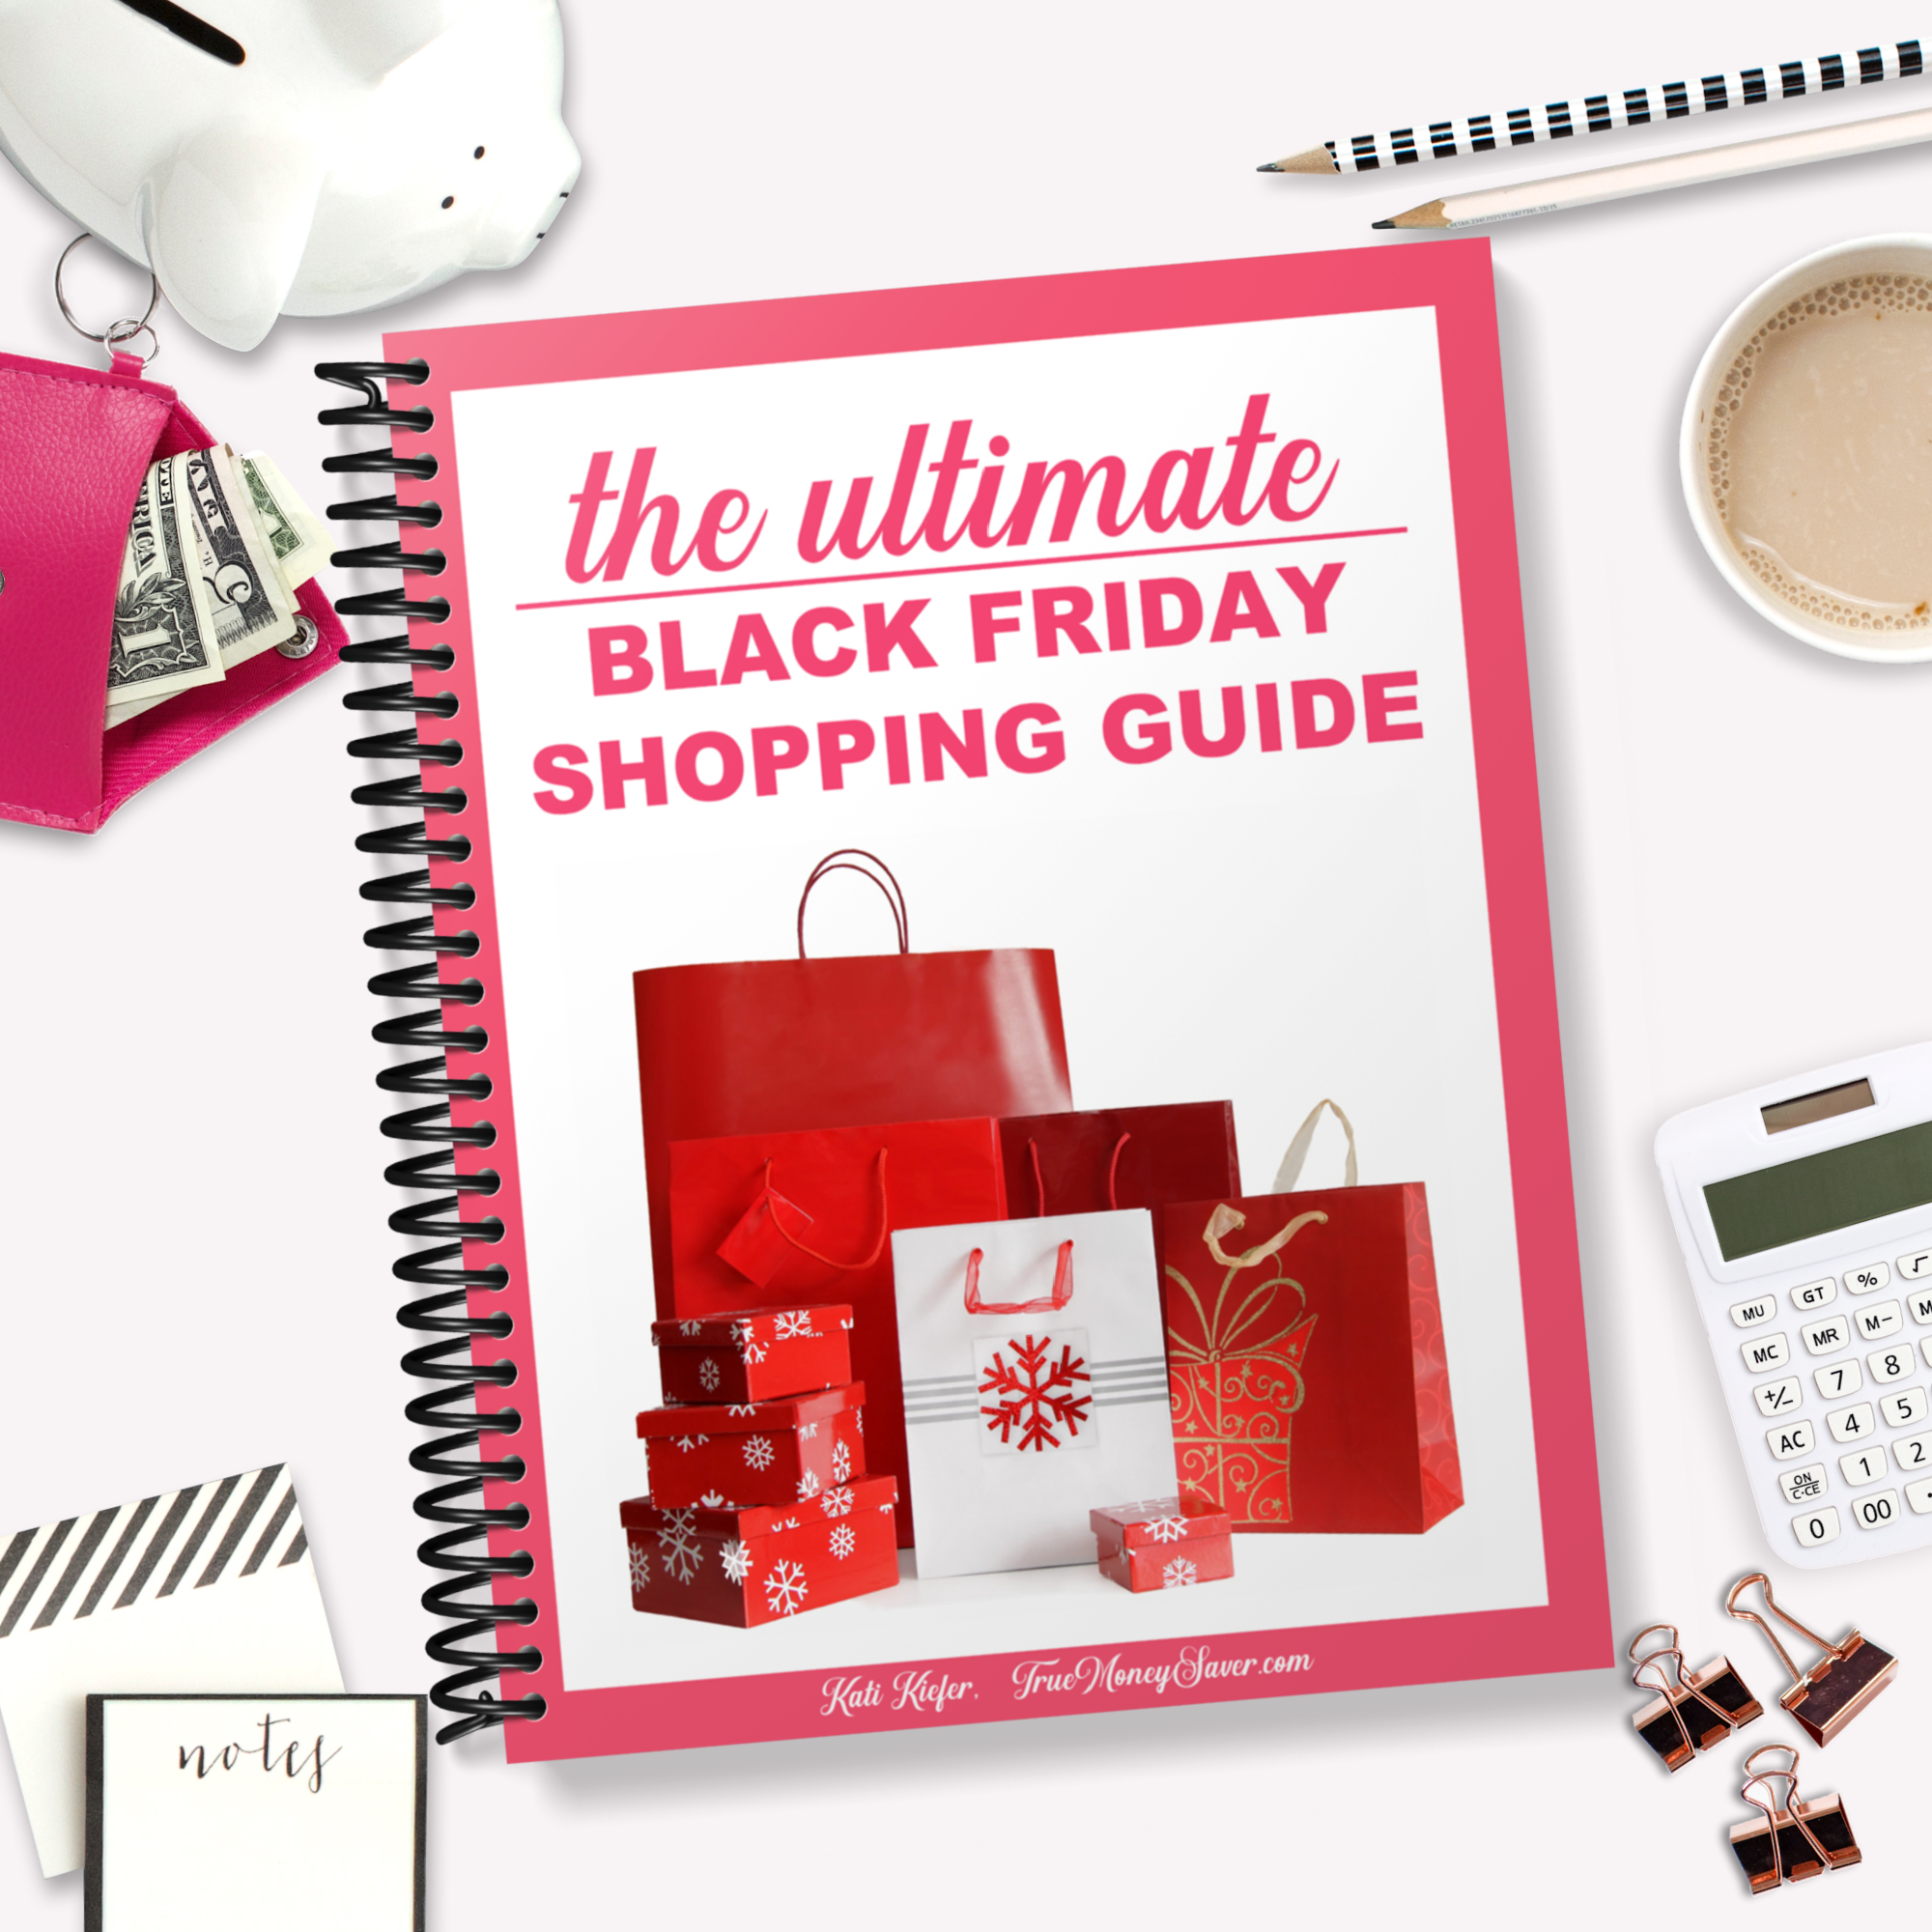 Ultimate Black Friday Shopping Guide